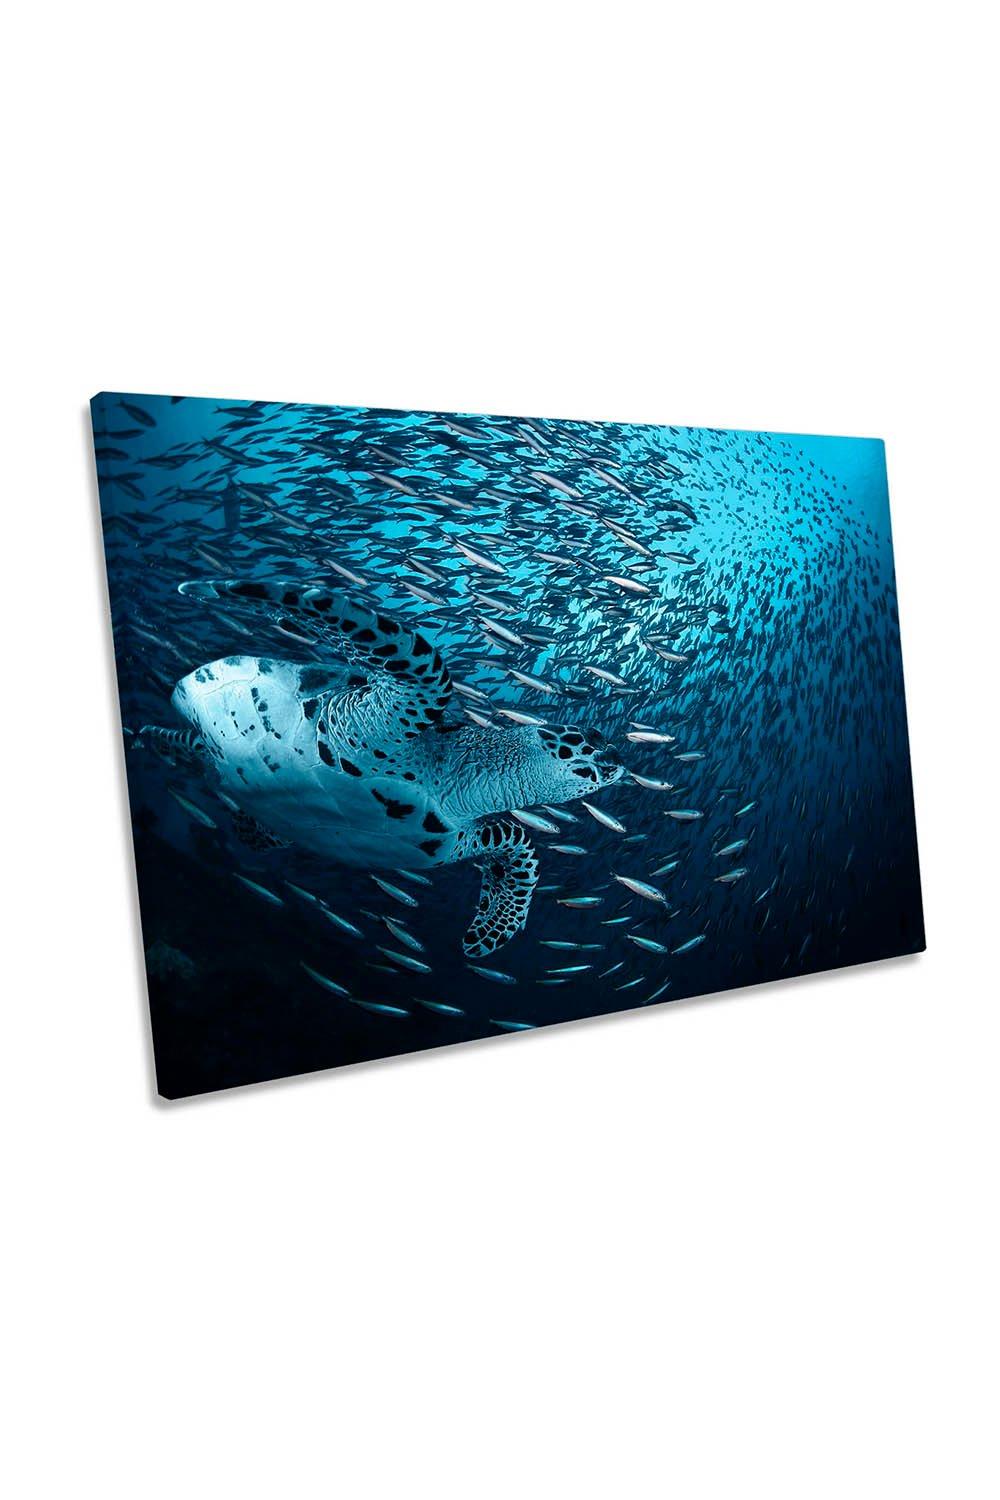 Sea Turtle Tropical Fish Blue Canvas Wall Art Picture Print